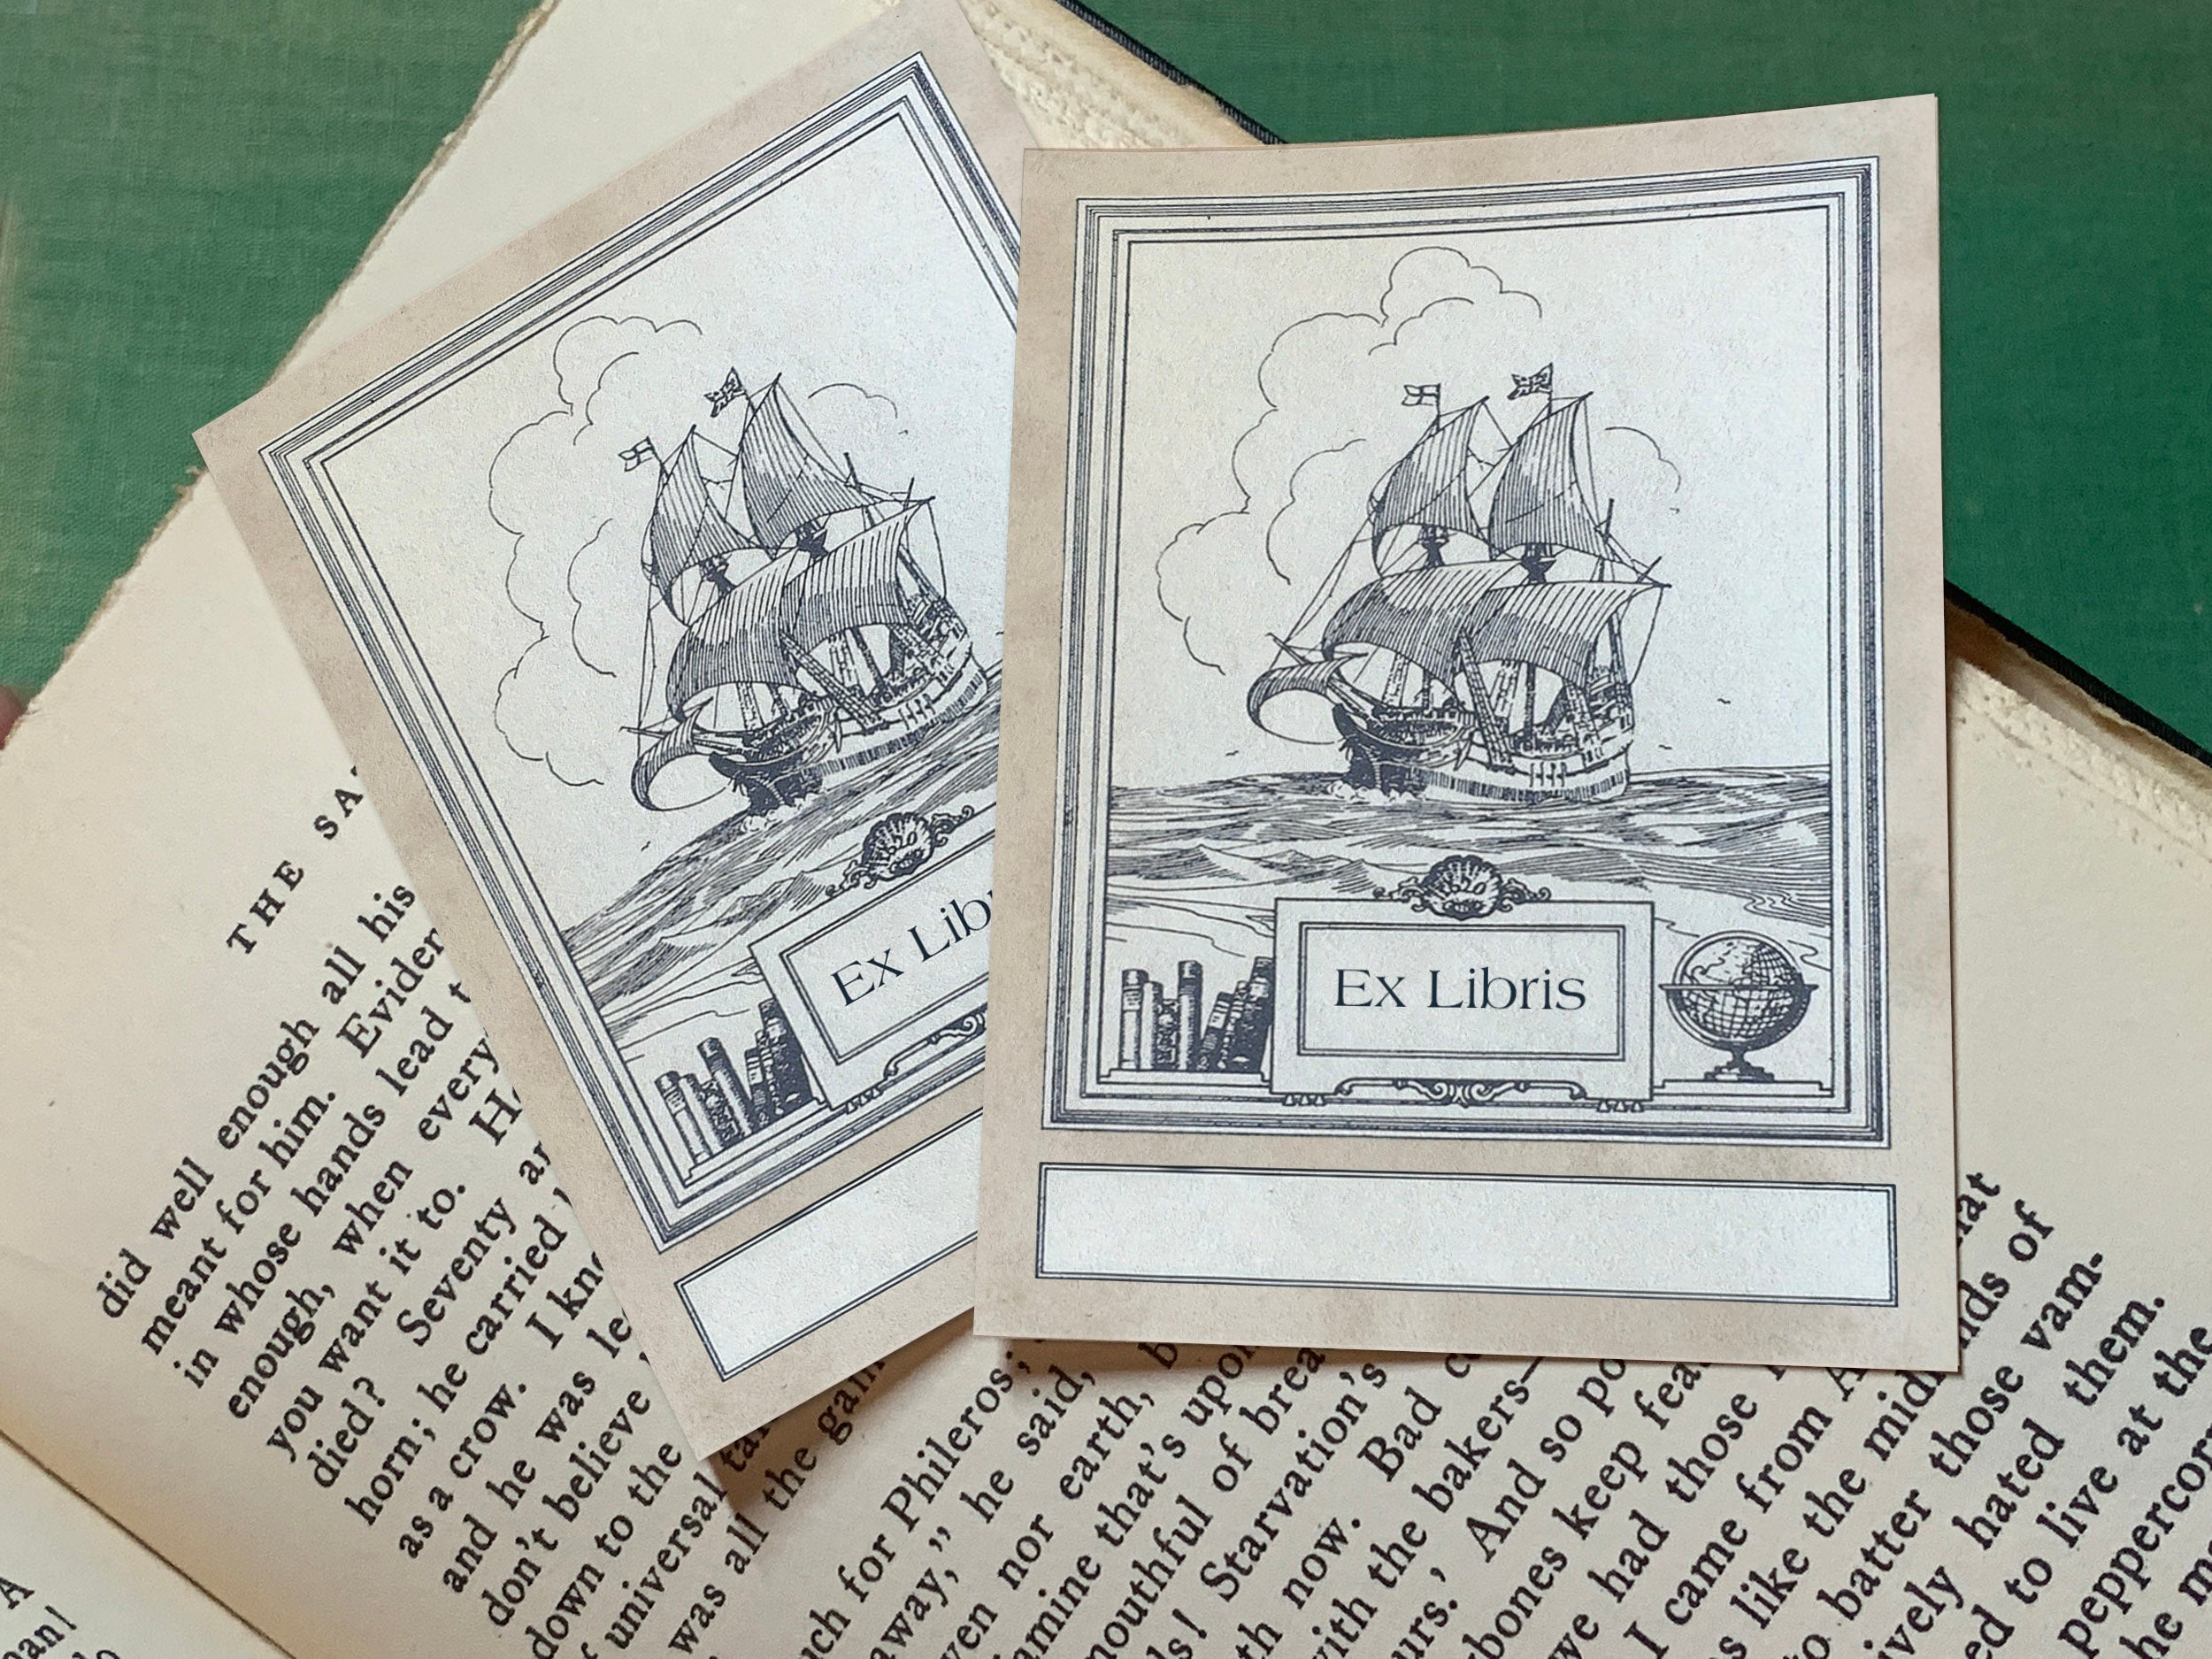 Trade Winds, Personalized Naval Ex-Libris Bookplates, Crafted on Traditional Gummed Paper, 3in x 4in, Set of 30